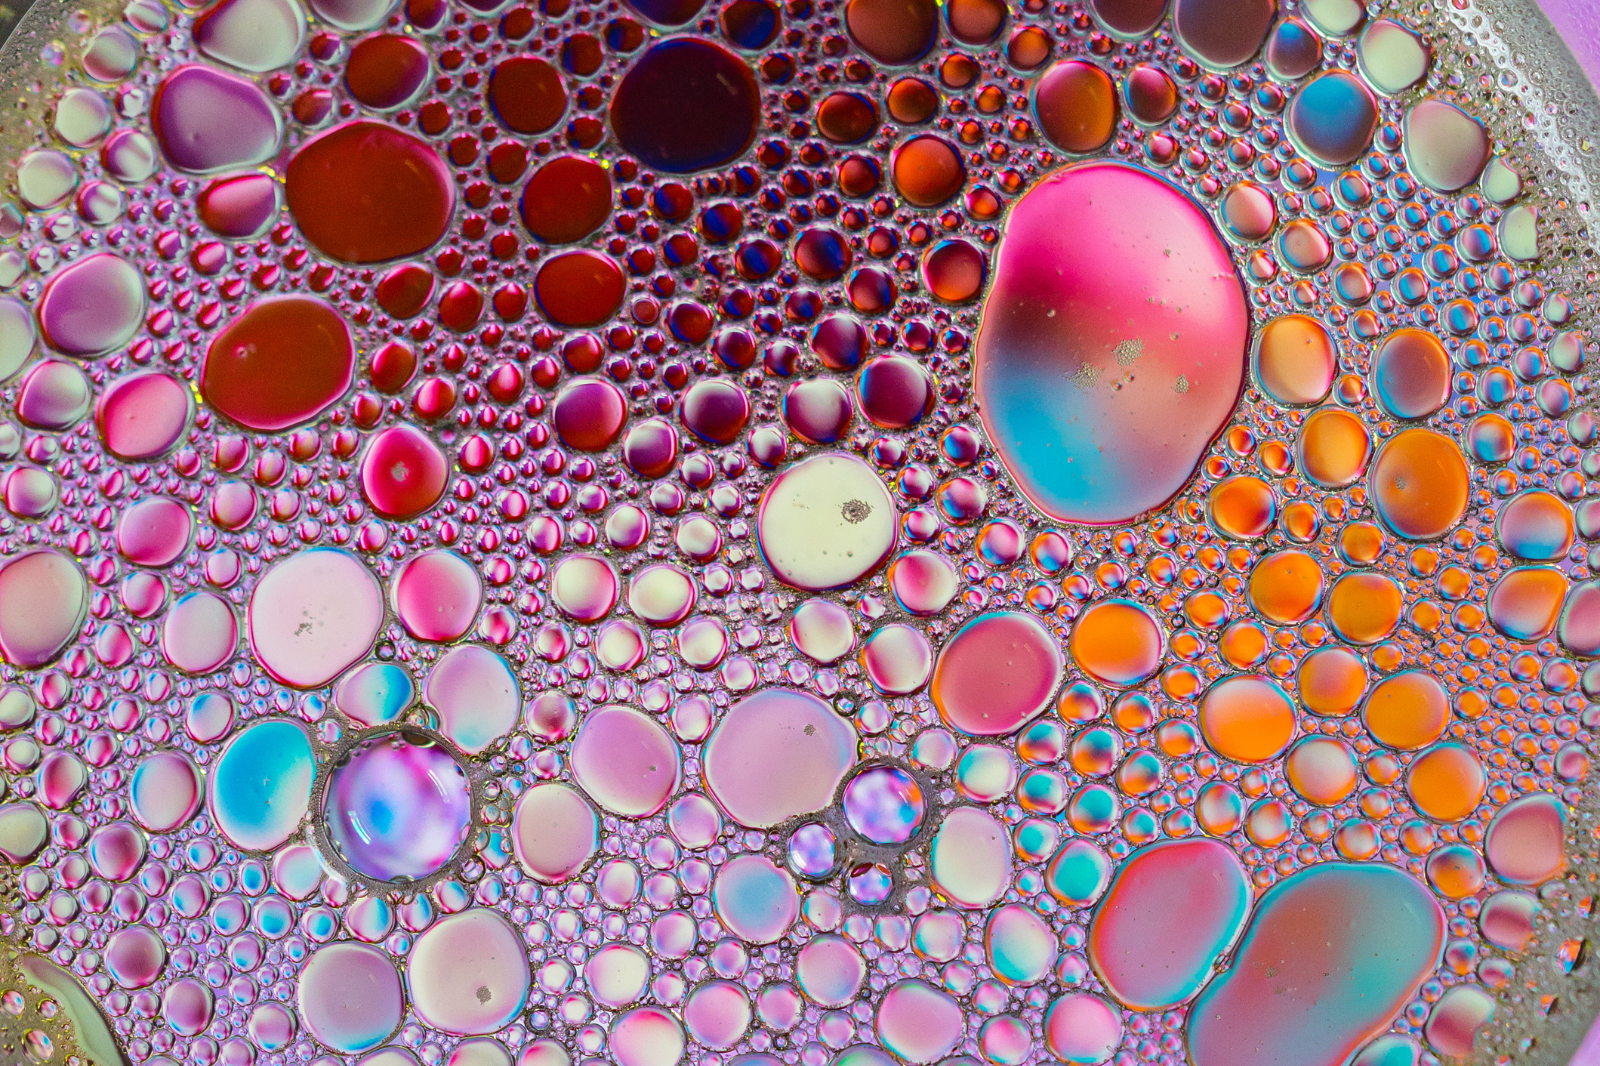 An up-close view of colorful oil and water